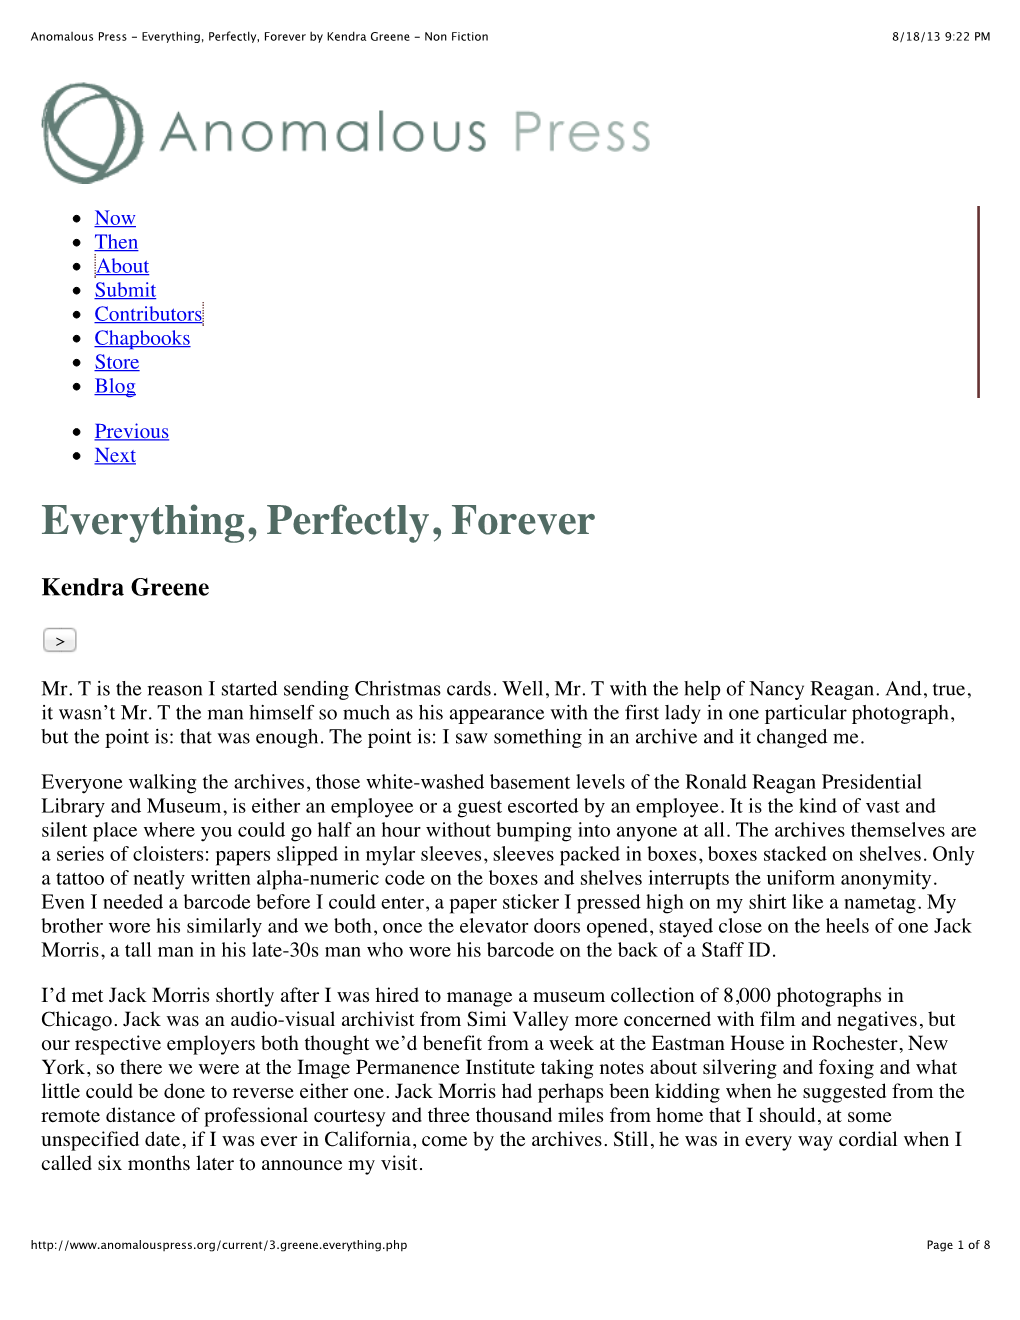 Anomalous Press - Everything, Perfectly, Forever by Kendra Greene - Non Fiction 8/18/13 9:22 PM